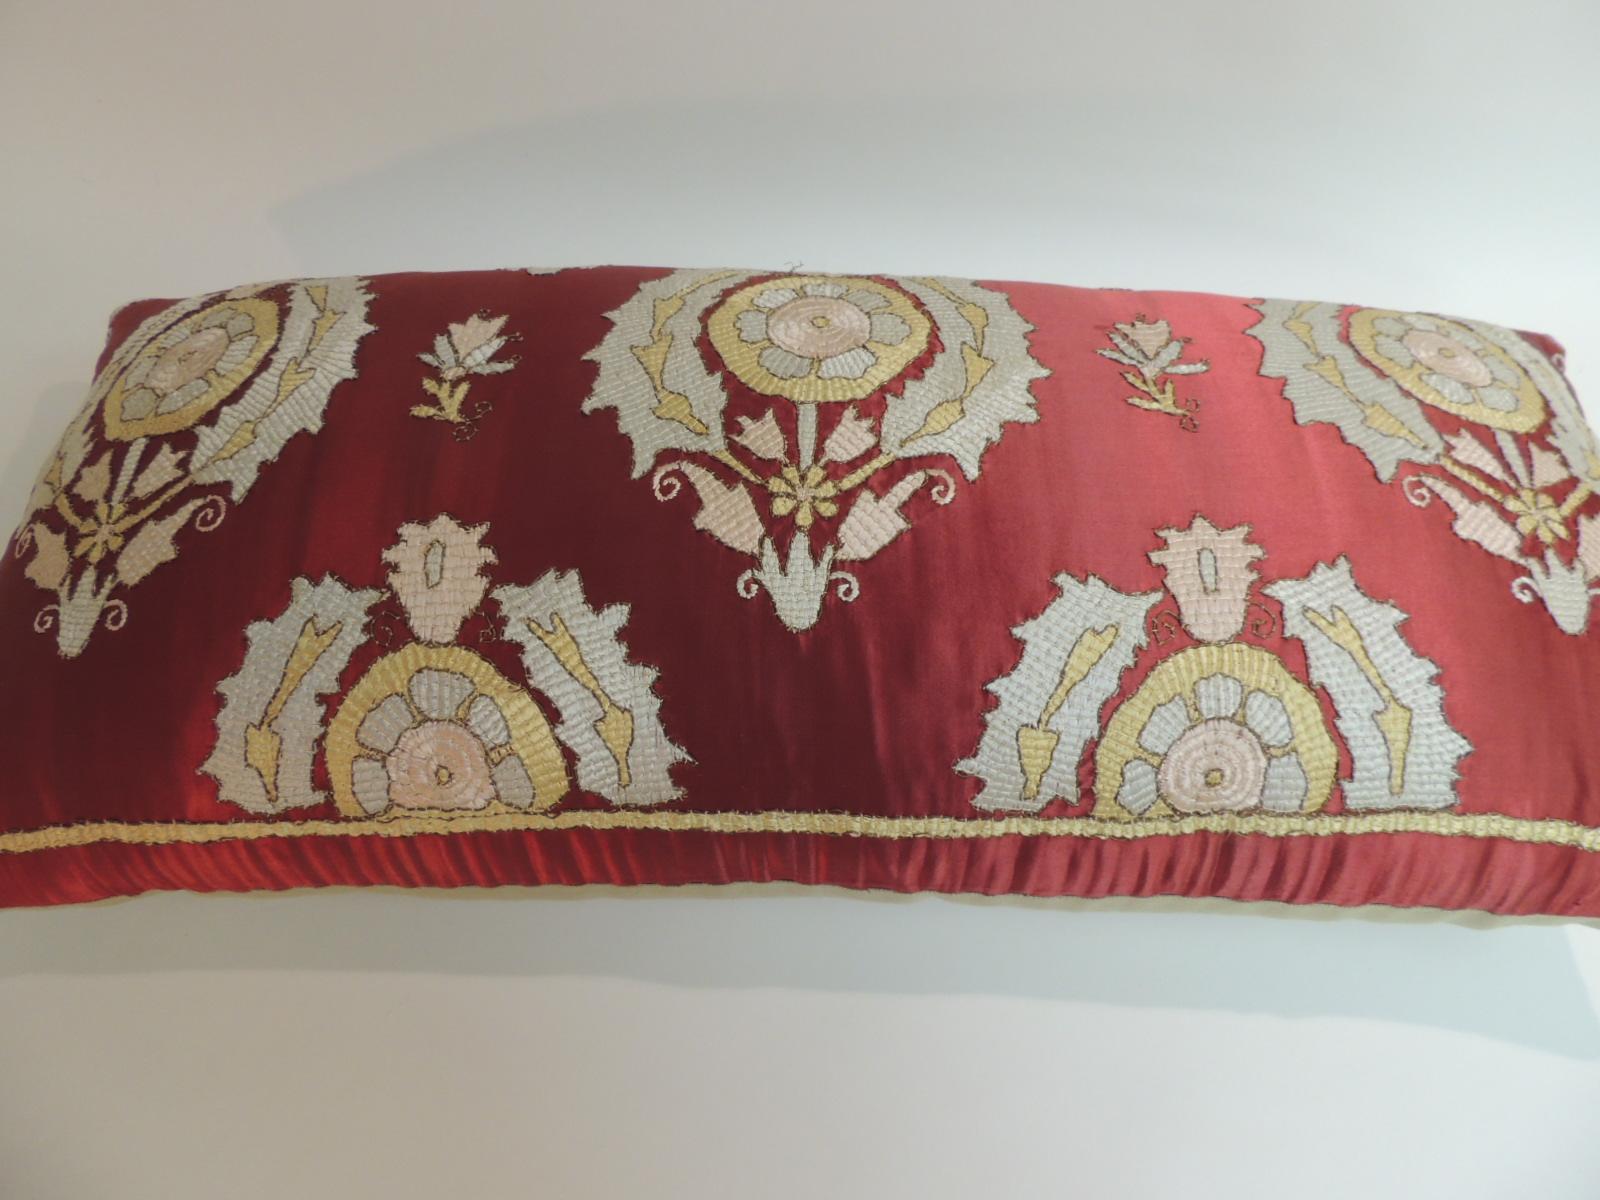 Hand-Crafted Antique Red and Green Silk Embroidered Applique Long Bolster Decorative Pillow